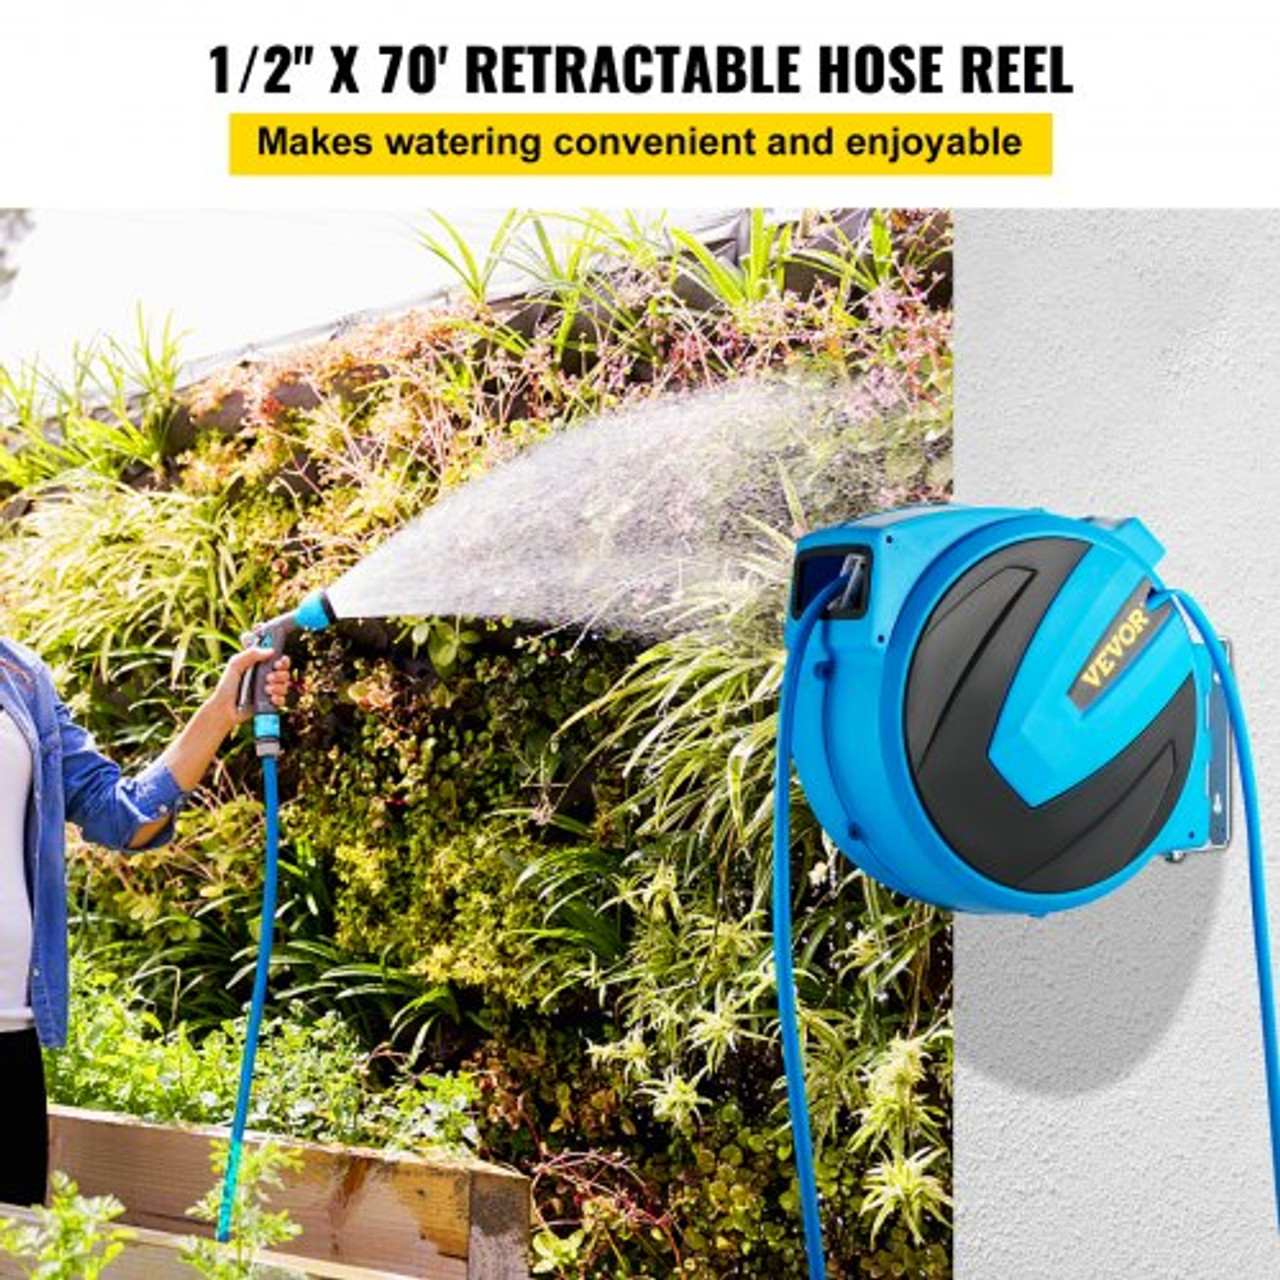 Retractable Hose Reel, 1/2 inch x 70 ft, Any Length Lock & Automatic Rewind Water Hose, Wall Mounted Garden Hose Reel w/ 180ø Swivel Bracket and 7 Pattern Hose Nozzle, Blue